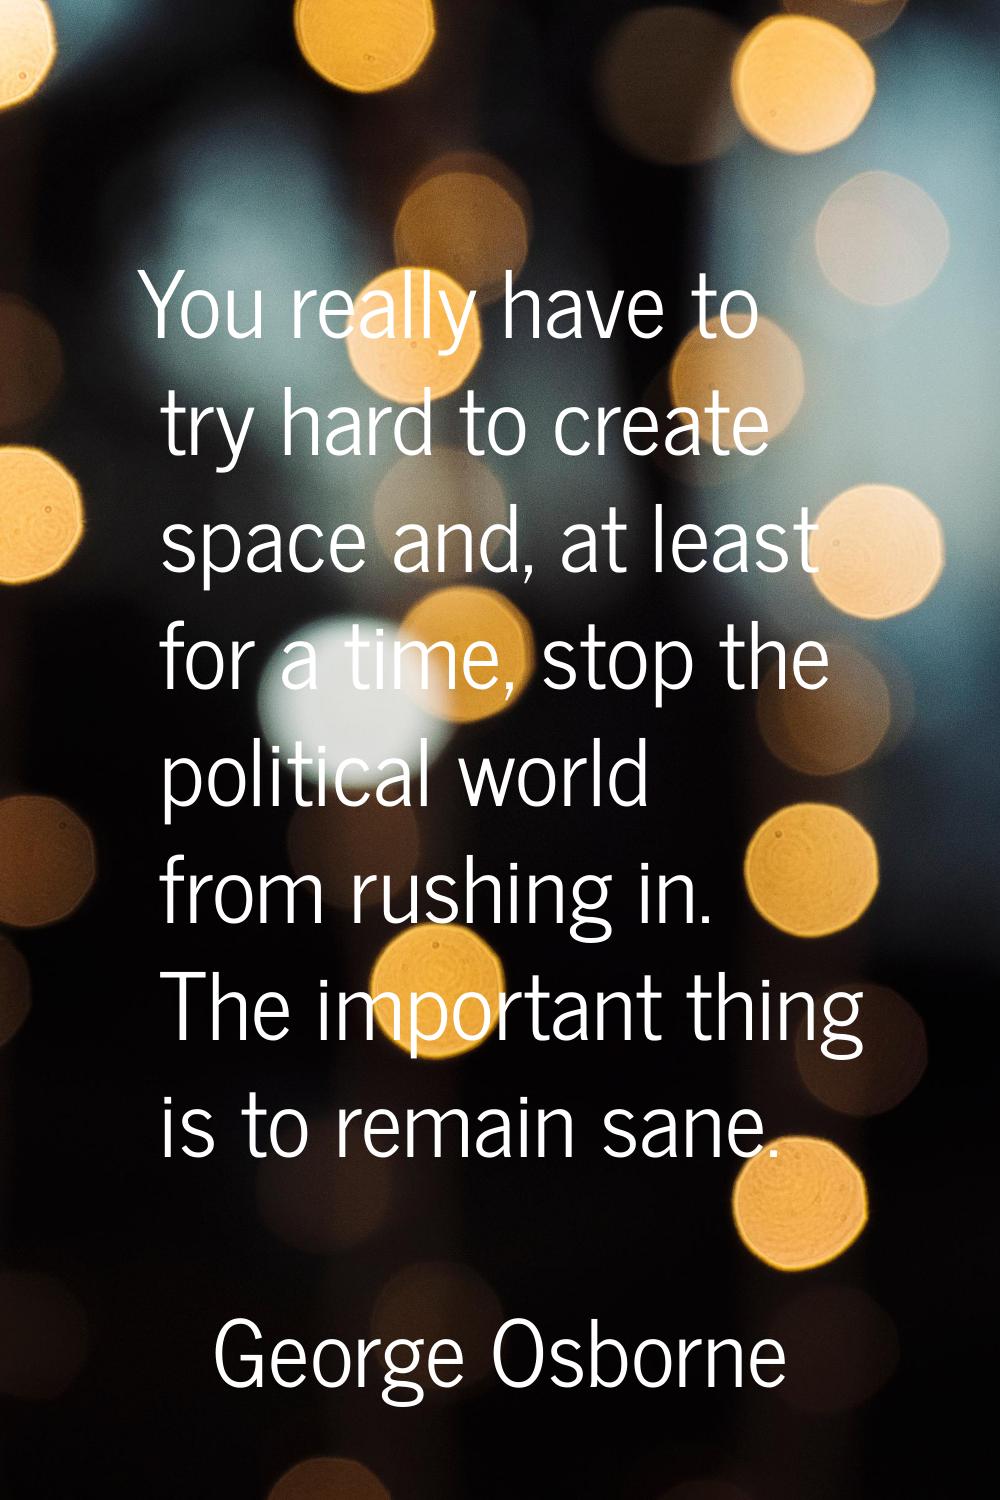 You really have to try hard to create space and, at least for a time, stop the political world from